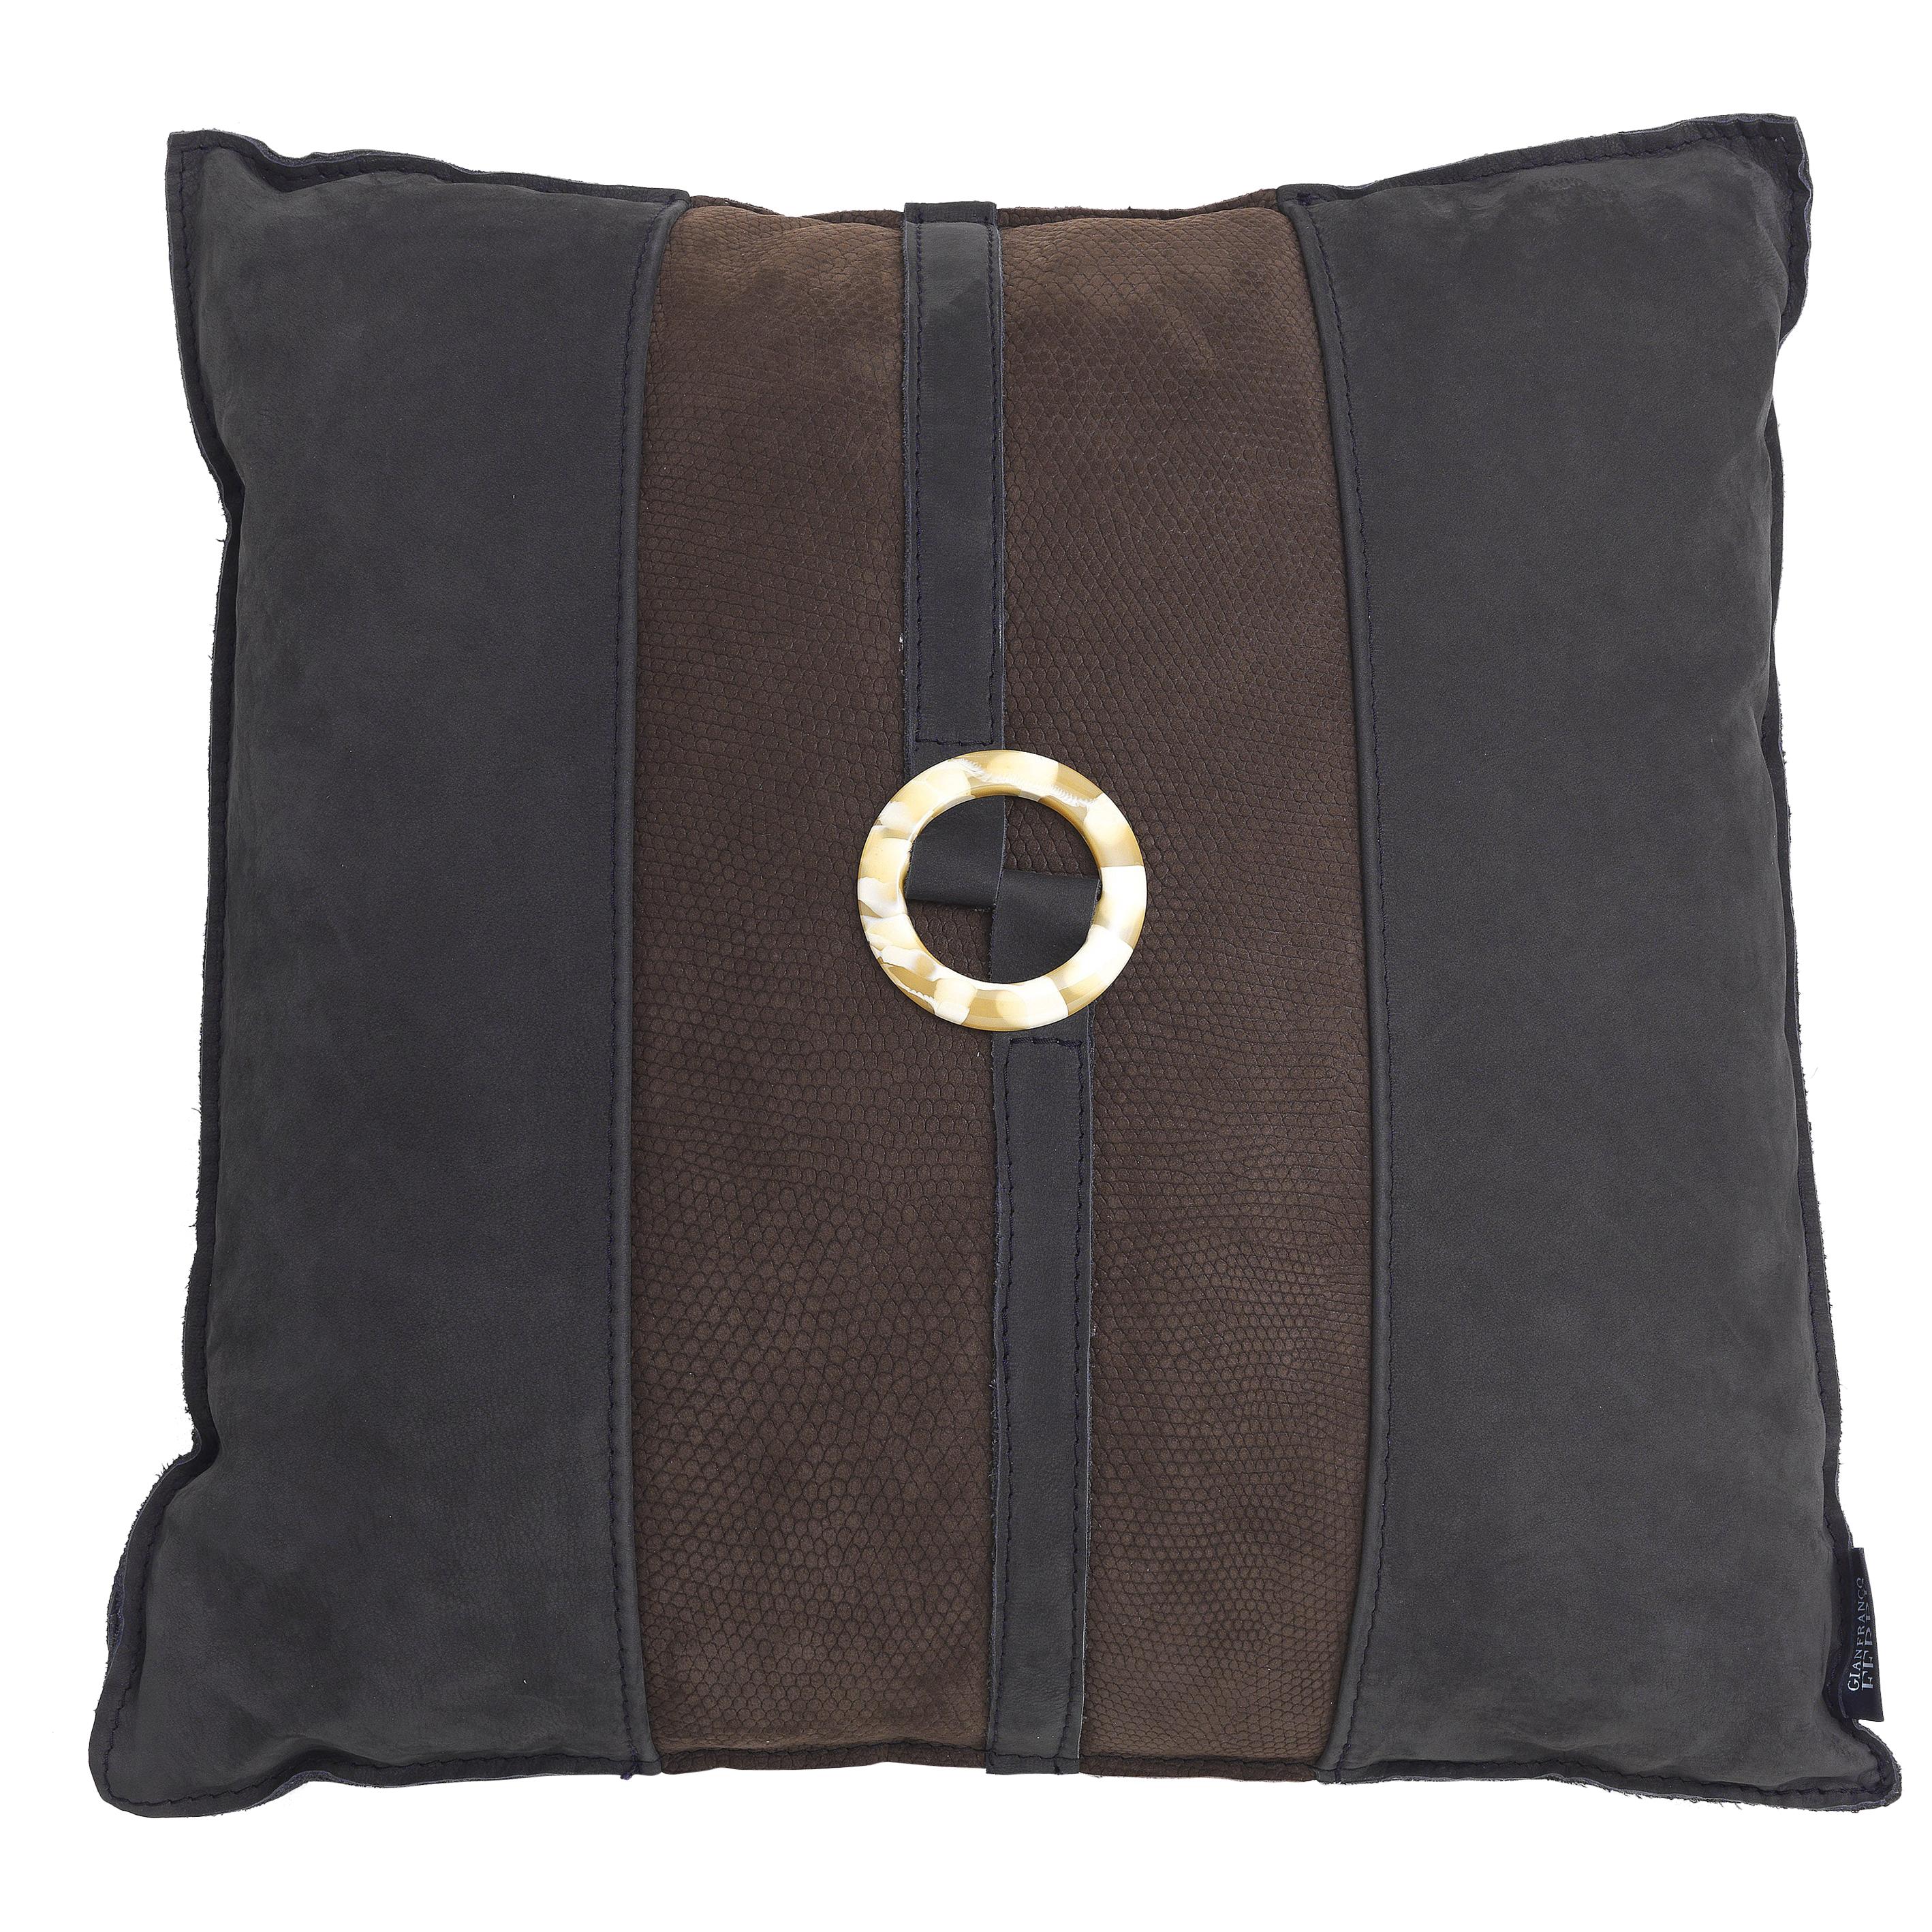 21st Century Ring_2 Decorative Cushion in Suede by Gianfranco Ferré Home